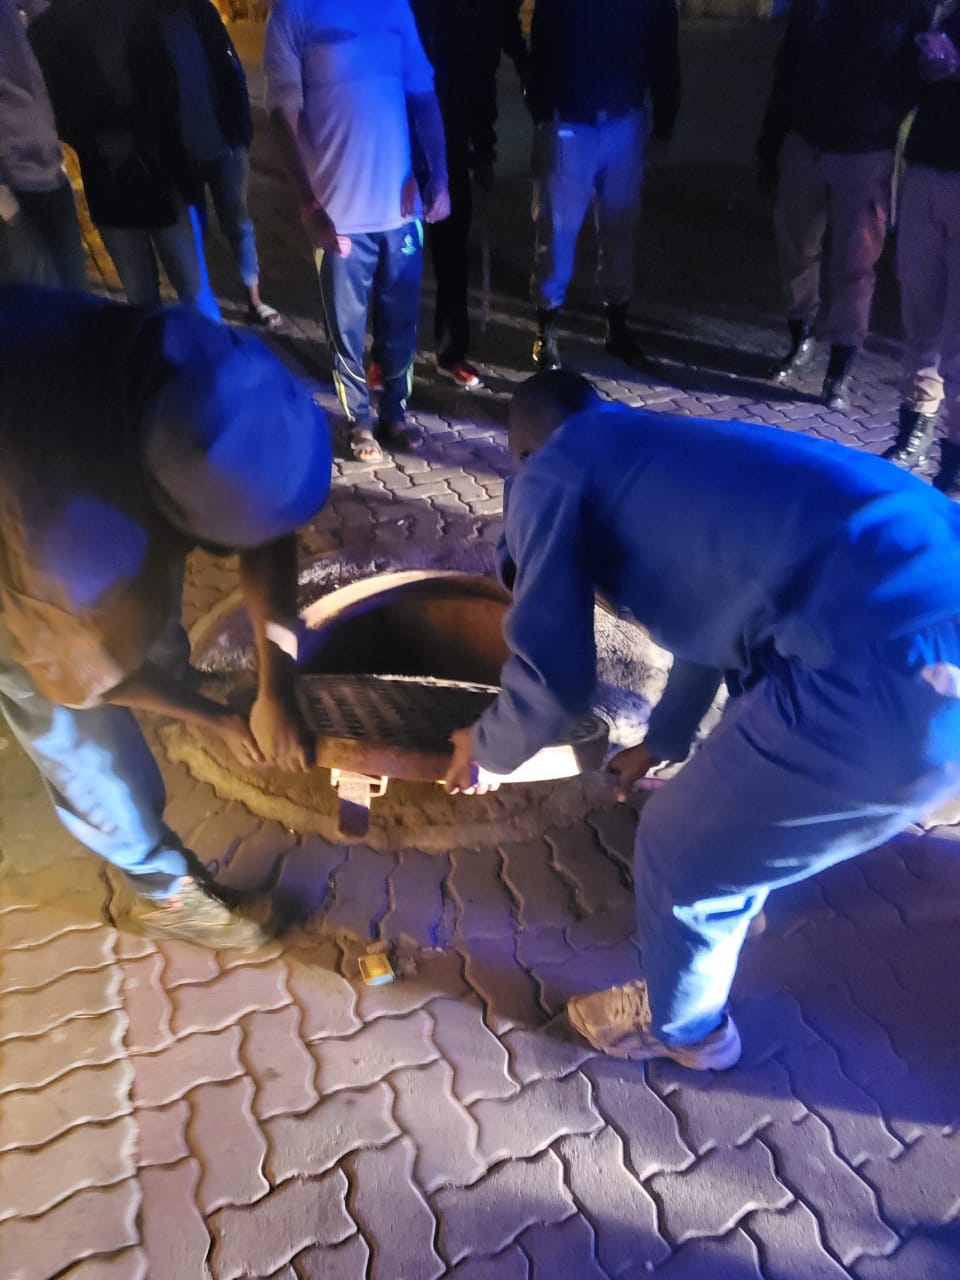 Four thugs arrested for Cable theft in Alexandra